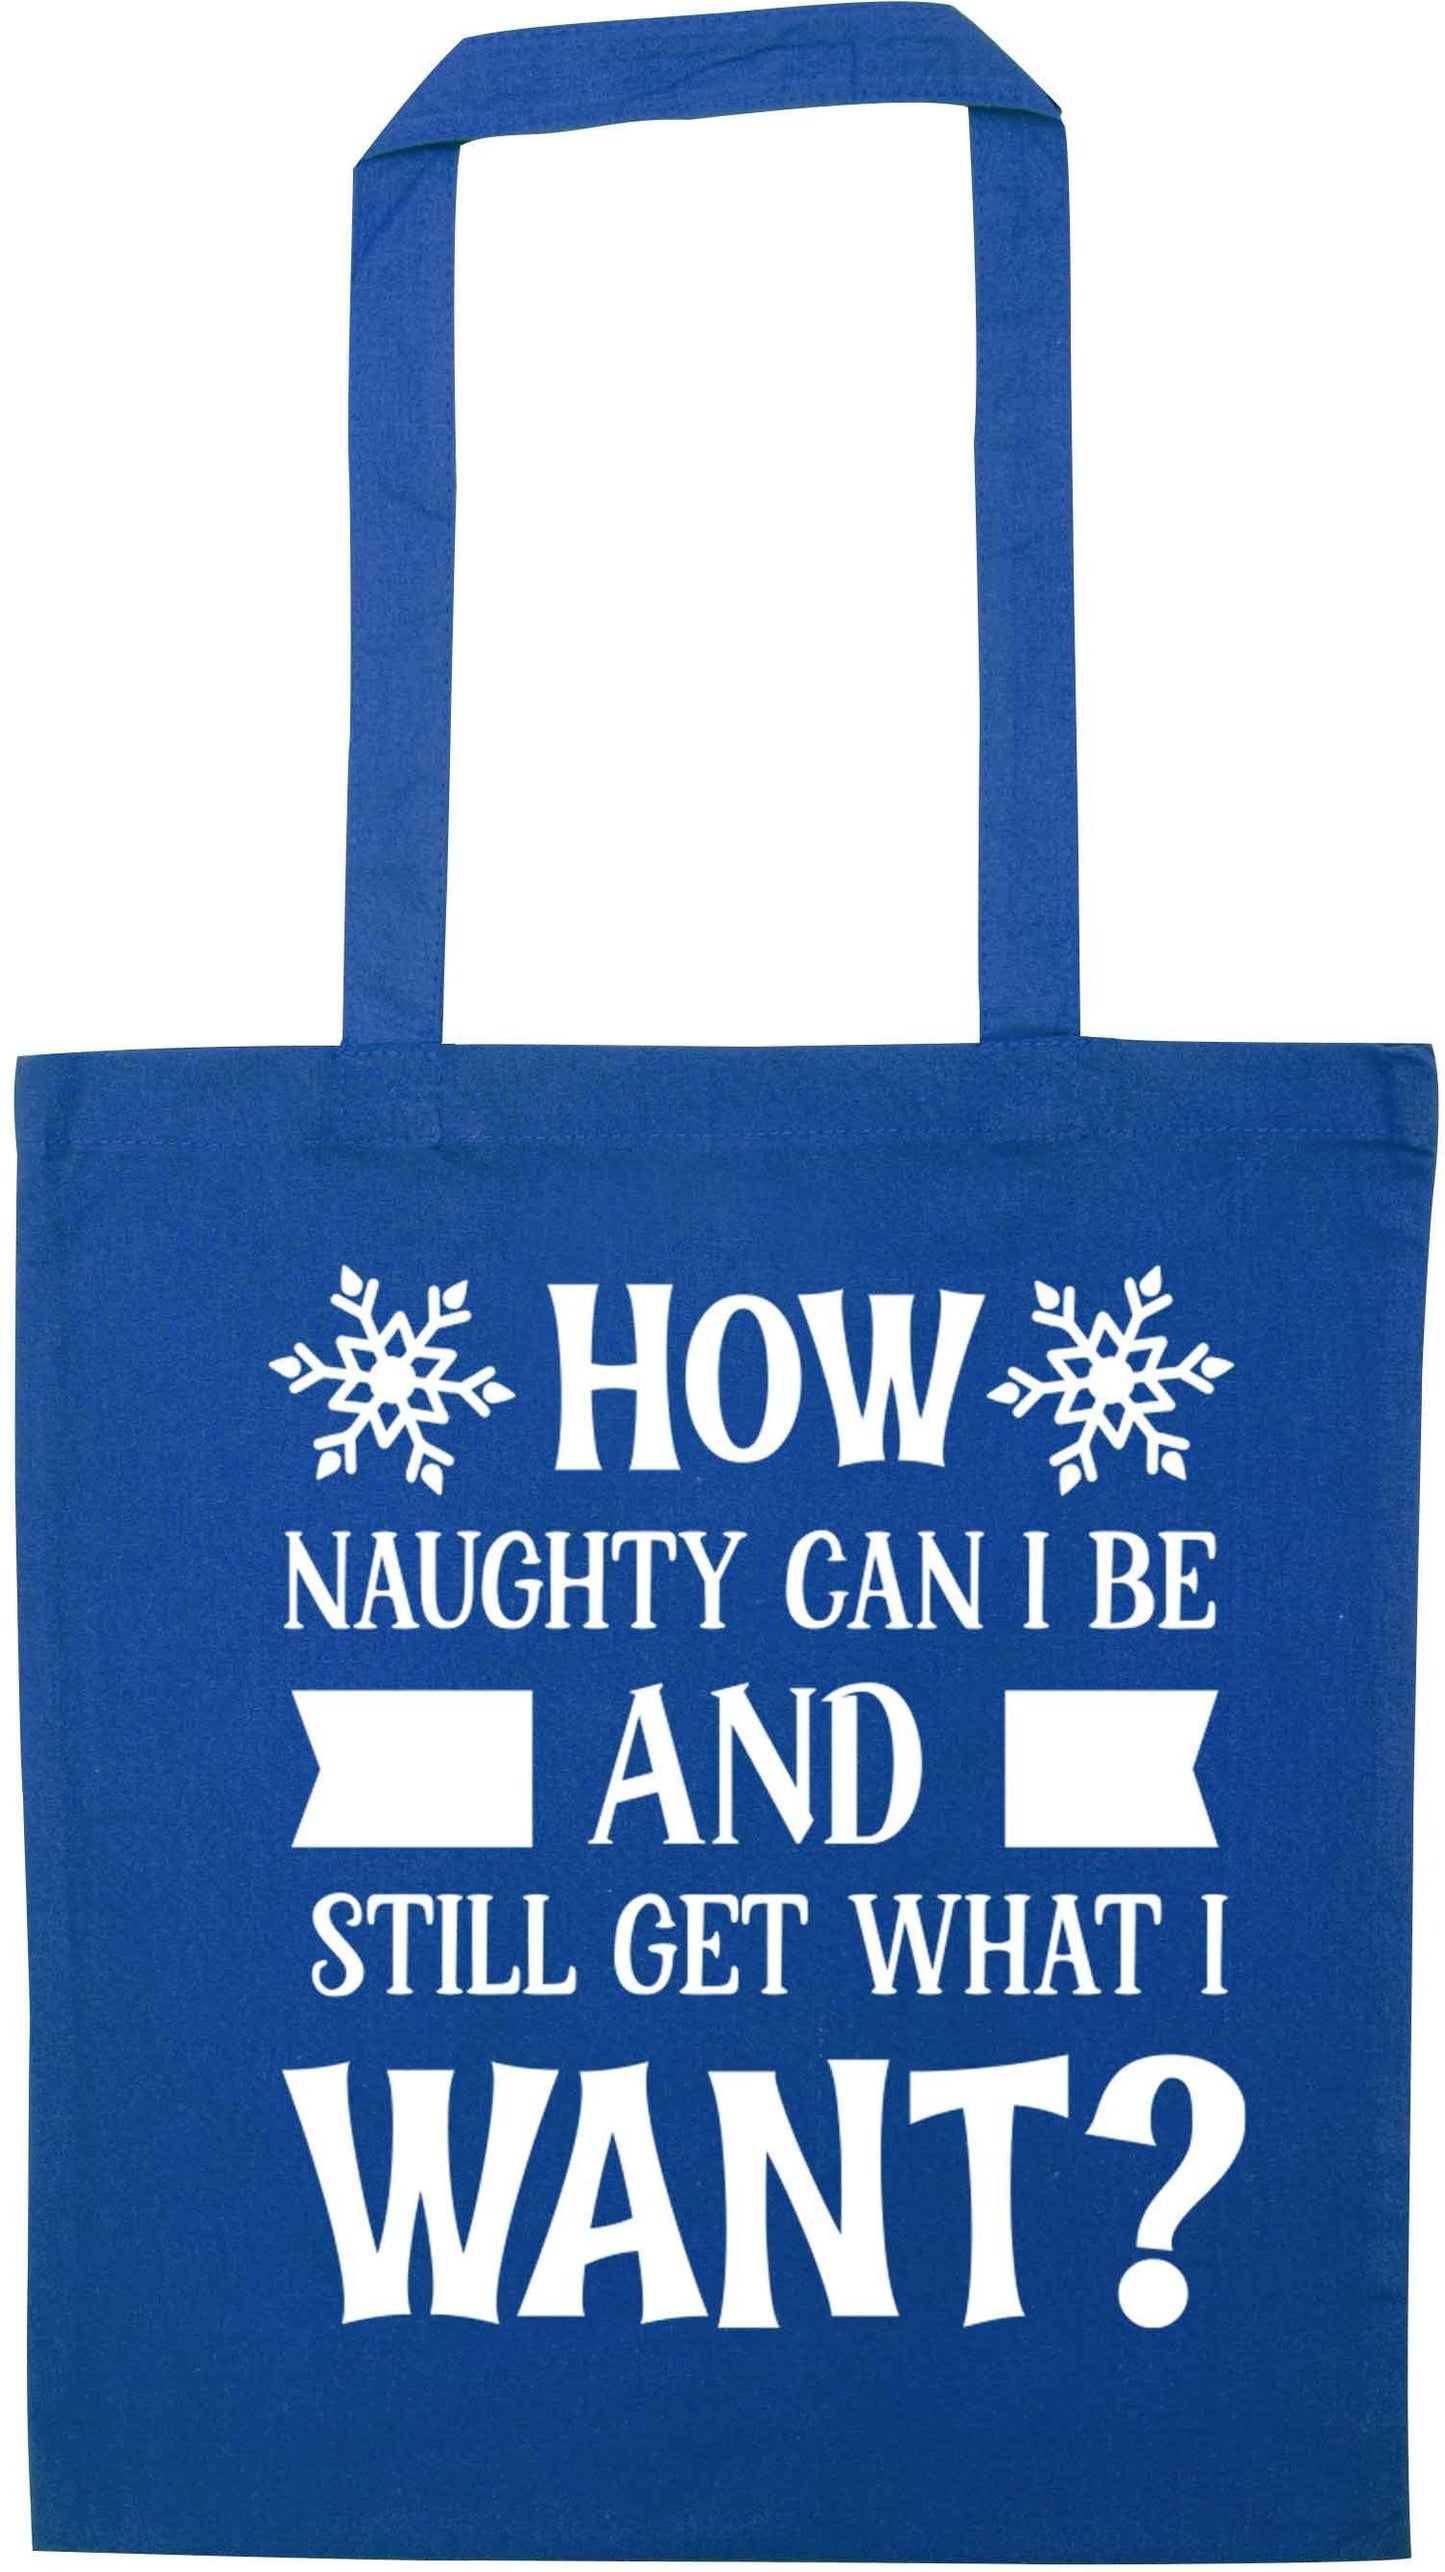 How naughty can I be and still get what I want? blue tote bag